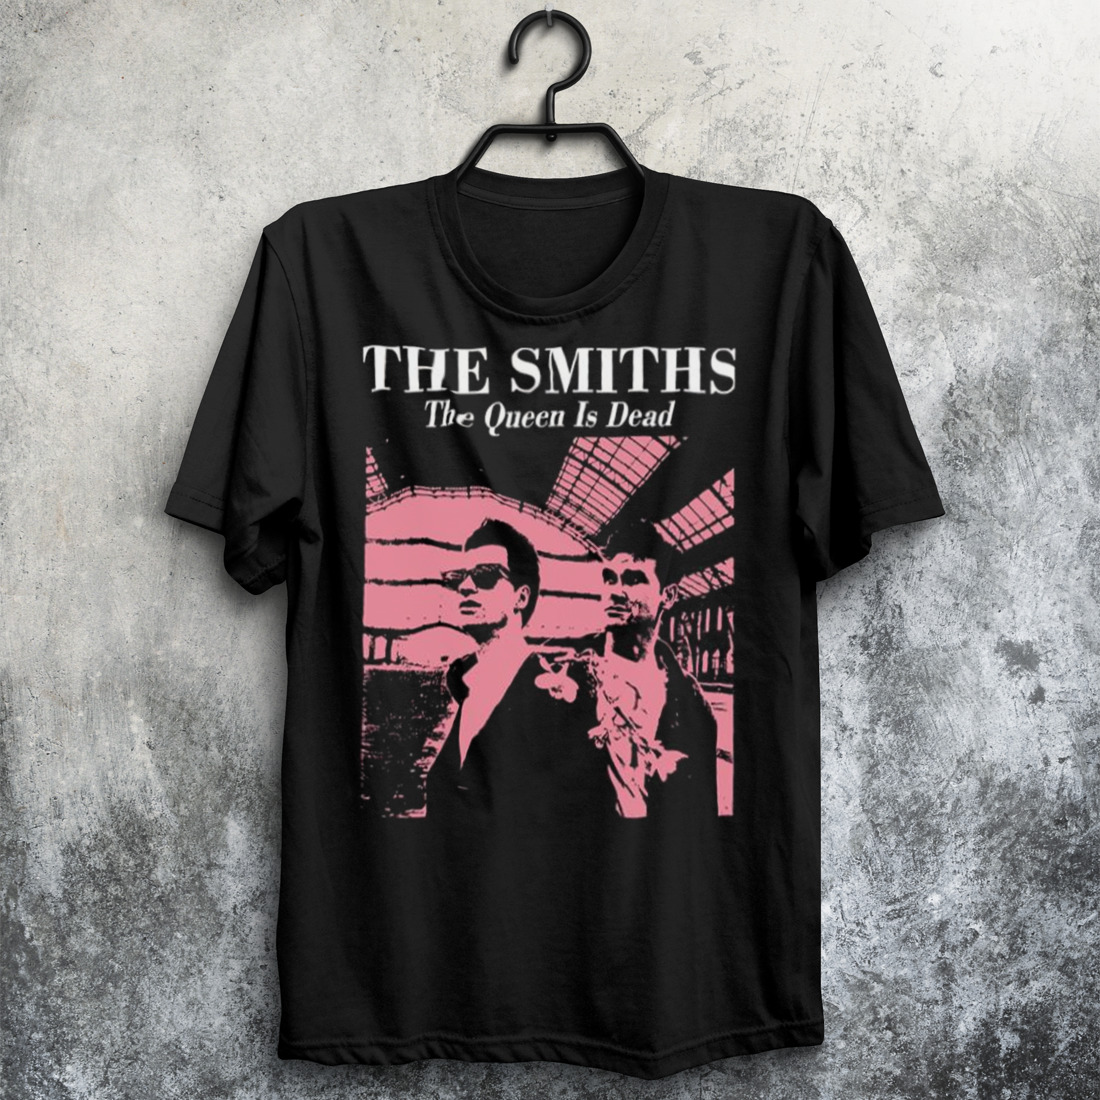 Rip Andy Rourke The Smiths shirt